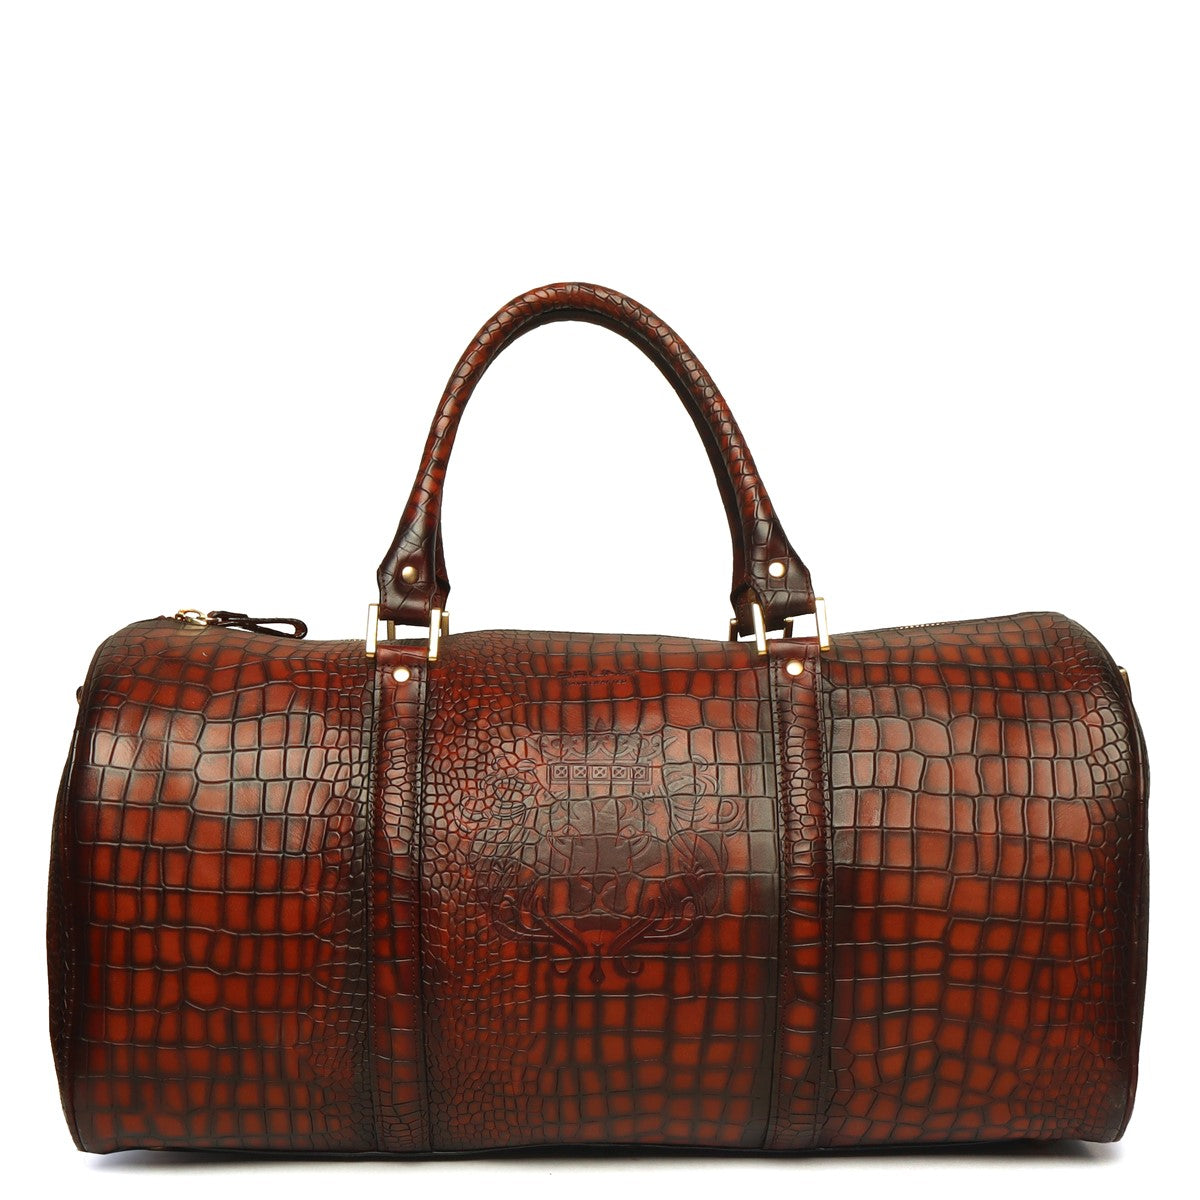 Hand-Painted Duffle Bag In Smokey Cognac Deep Cut Leather